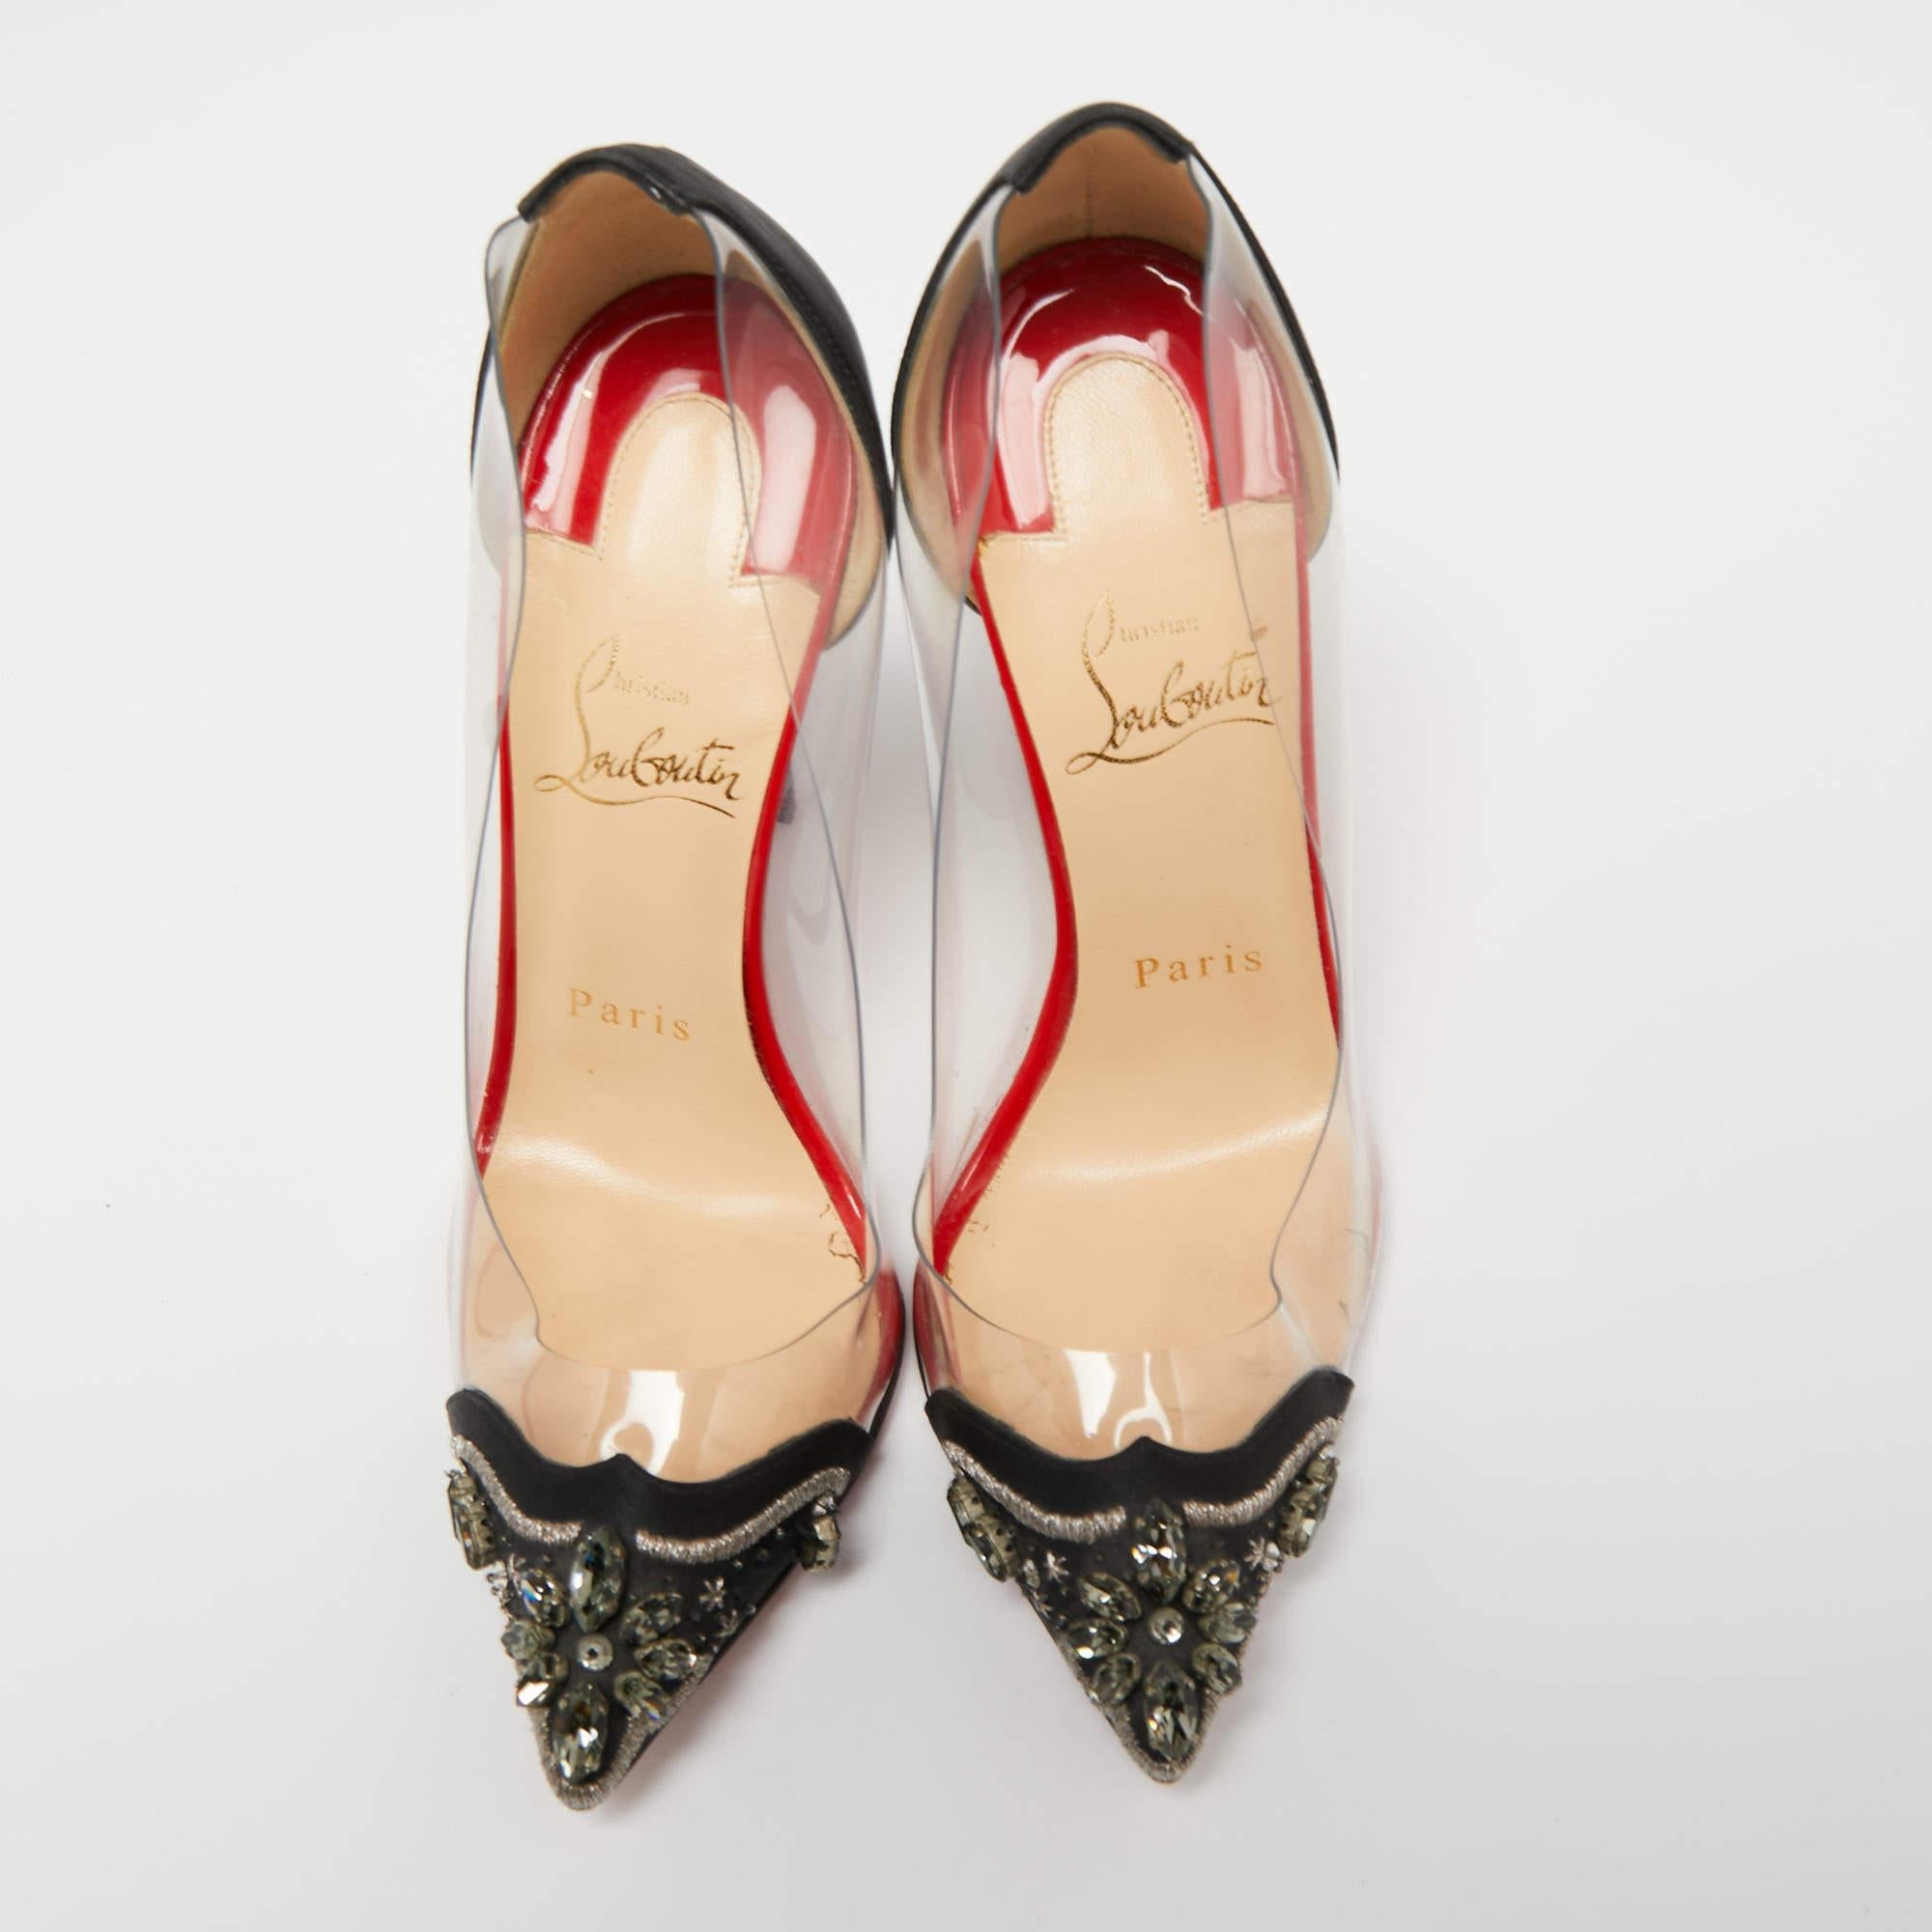 Inspired by the glamorous Hindi film industry called Bollywood, these Christian Louboutin pumps have sleek cuts and a curvaceous arch. The pointed-toes are decorated with handcrafted embellishments and the counters are covered with satin. The